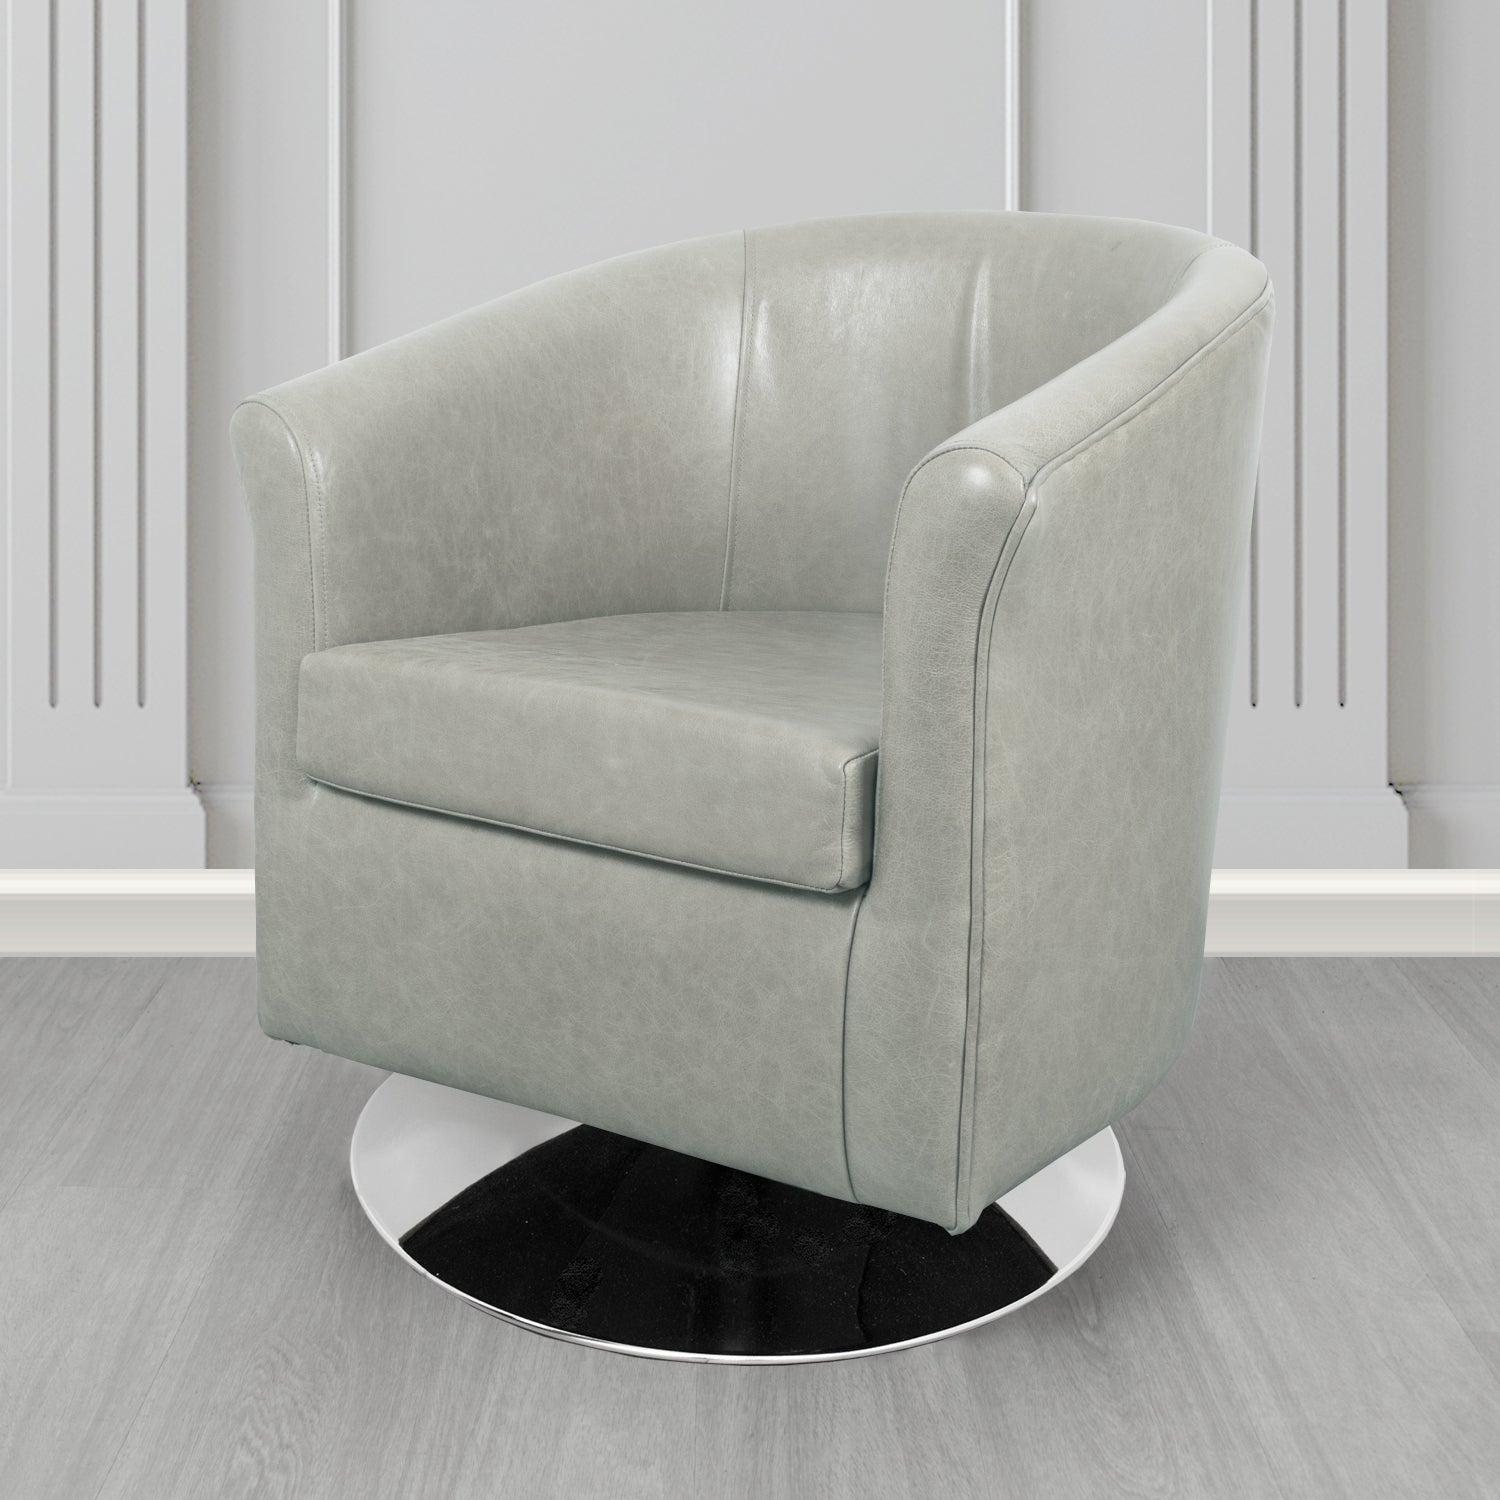 Tuscany Swivel Tub Chair in Crib 5 Old English Fossil Grey Genuine Leather - The Tub Chair Shop